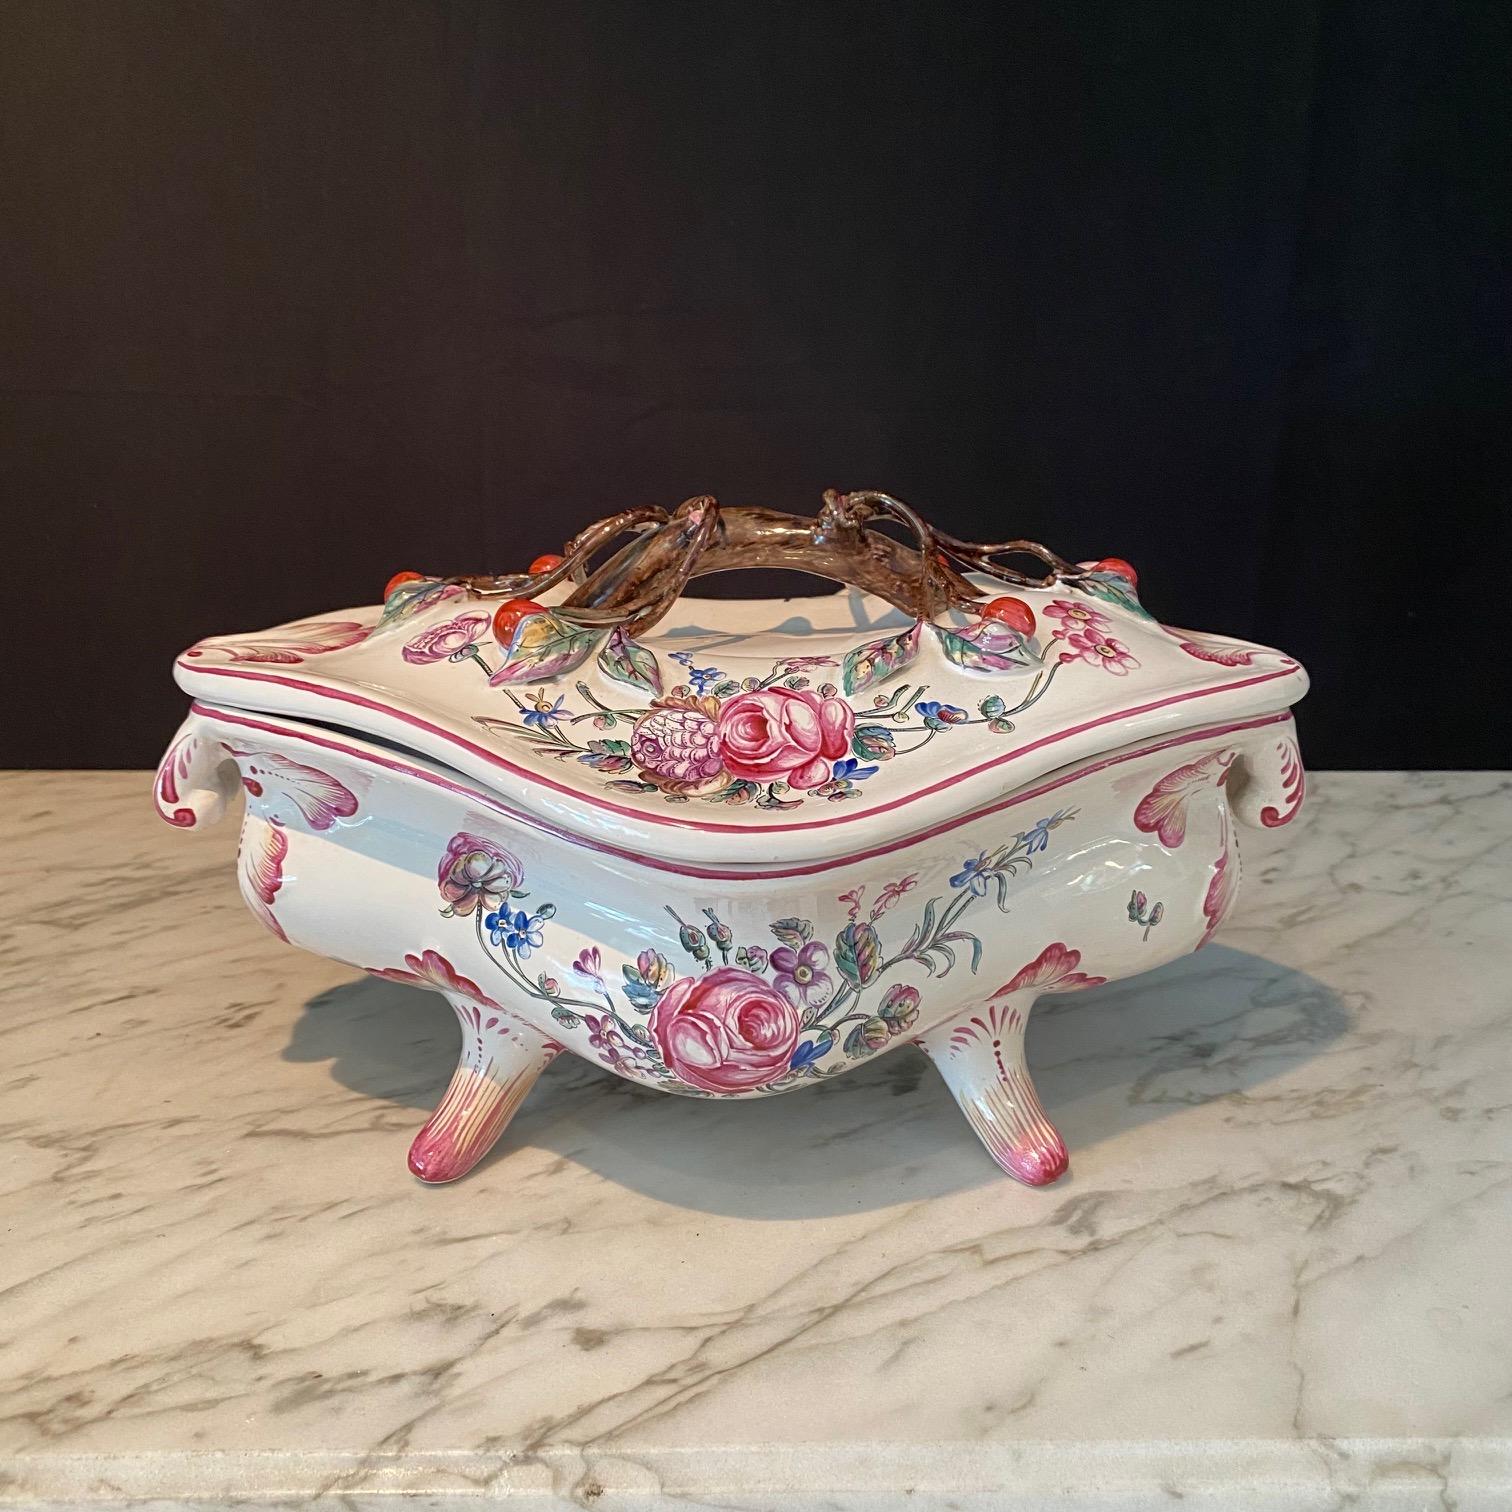 A lovely, highly detailed hand painted French Barbotine Majolica Faience soup tureen, with handles, feet and nicely sculpted cherry tree decorated cover.  The painted decoration on the sides and on the large platter include detailed flowers,